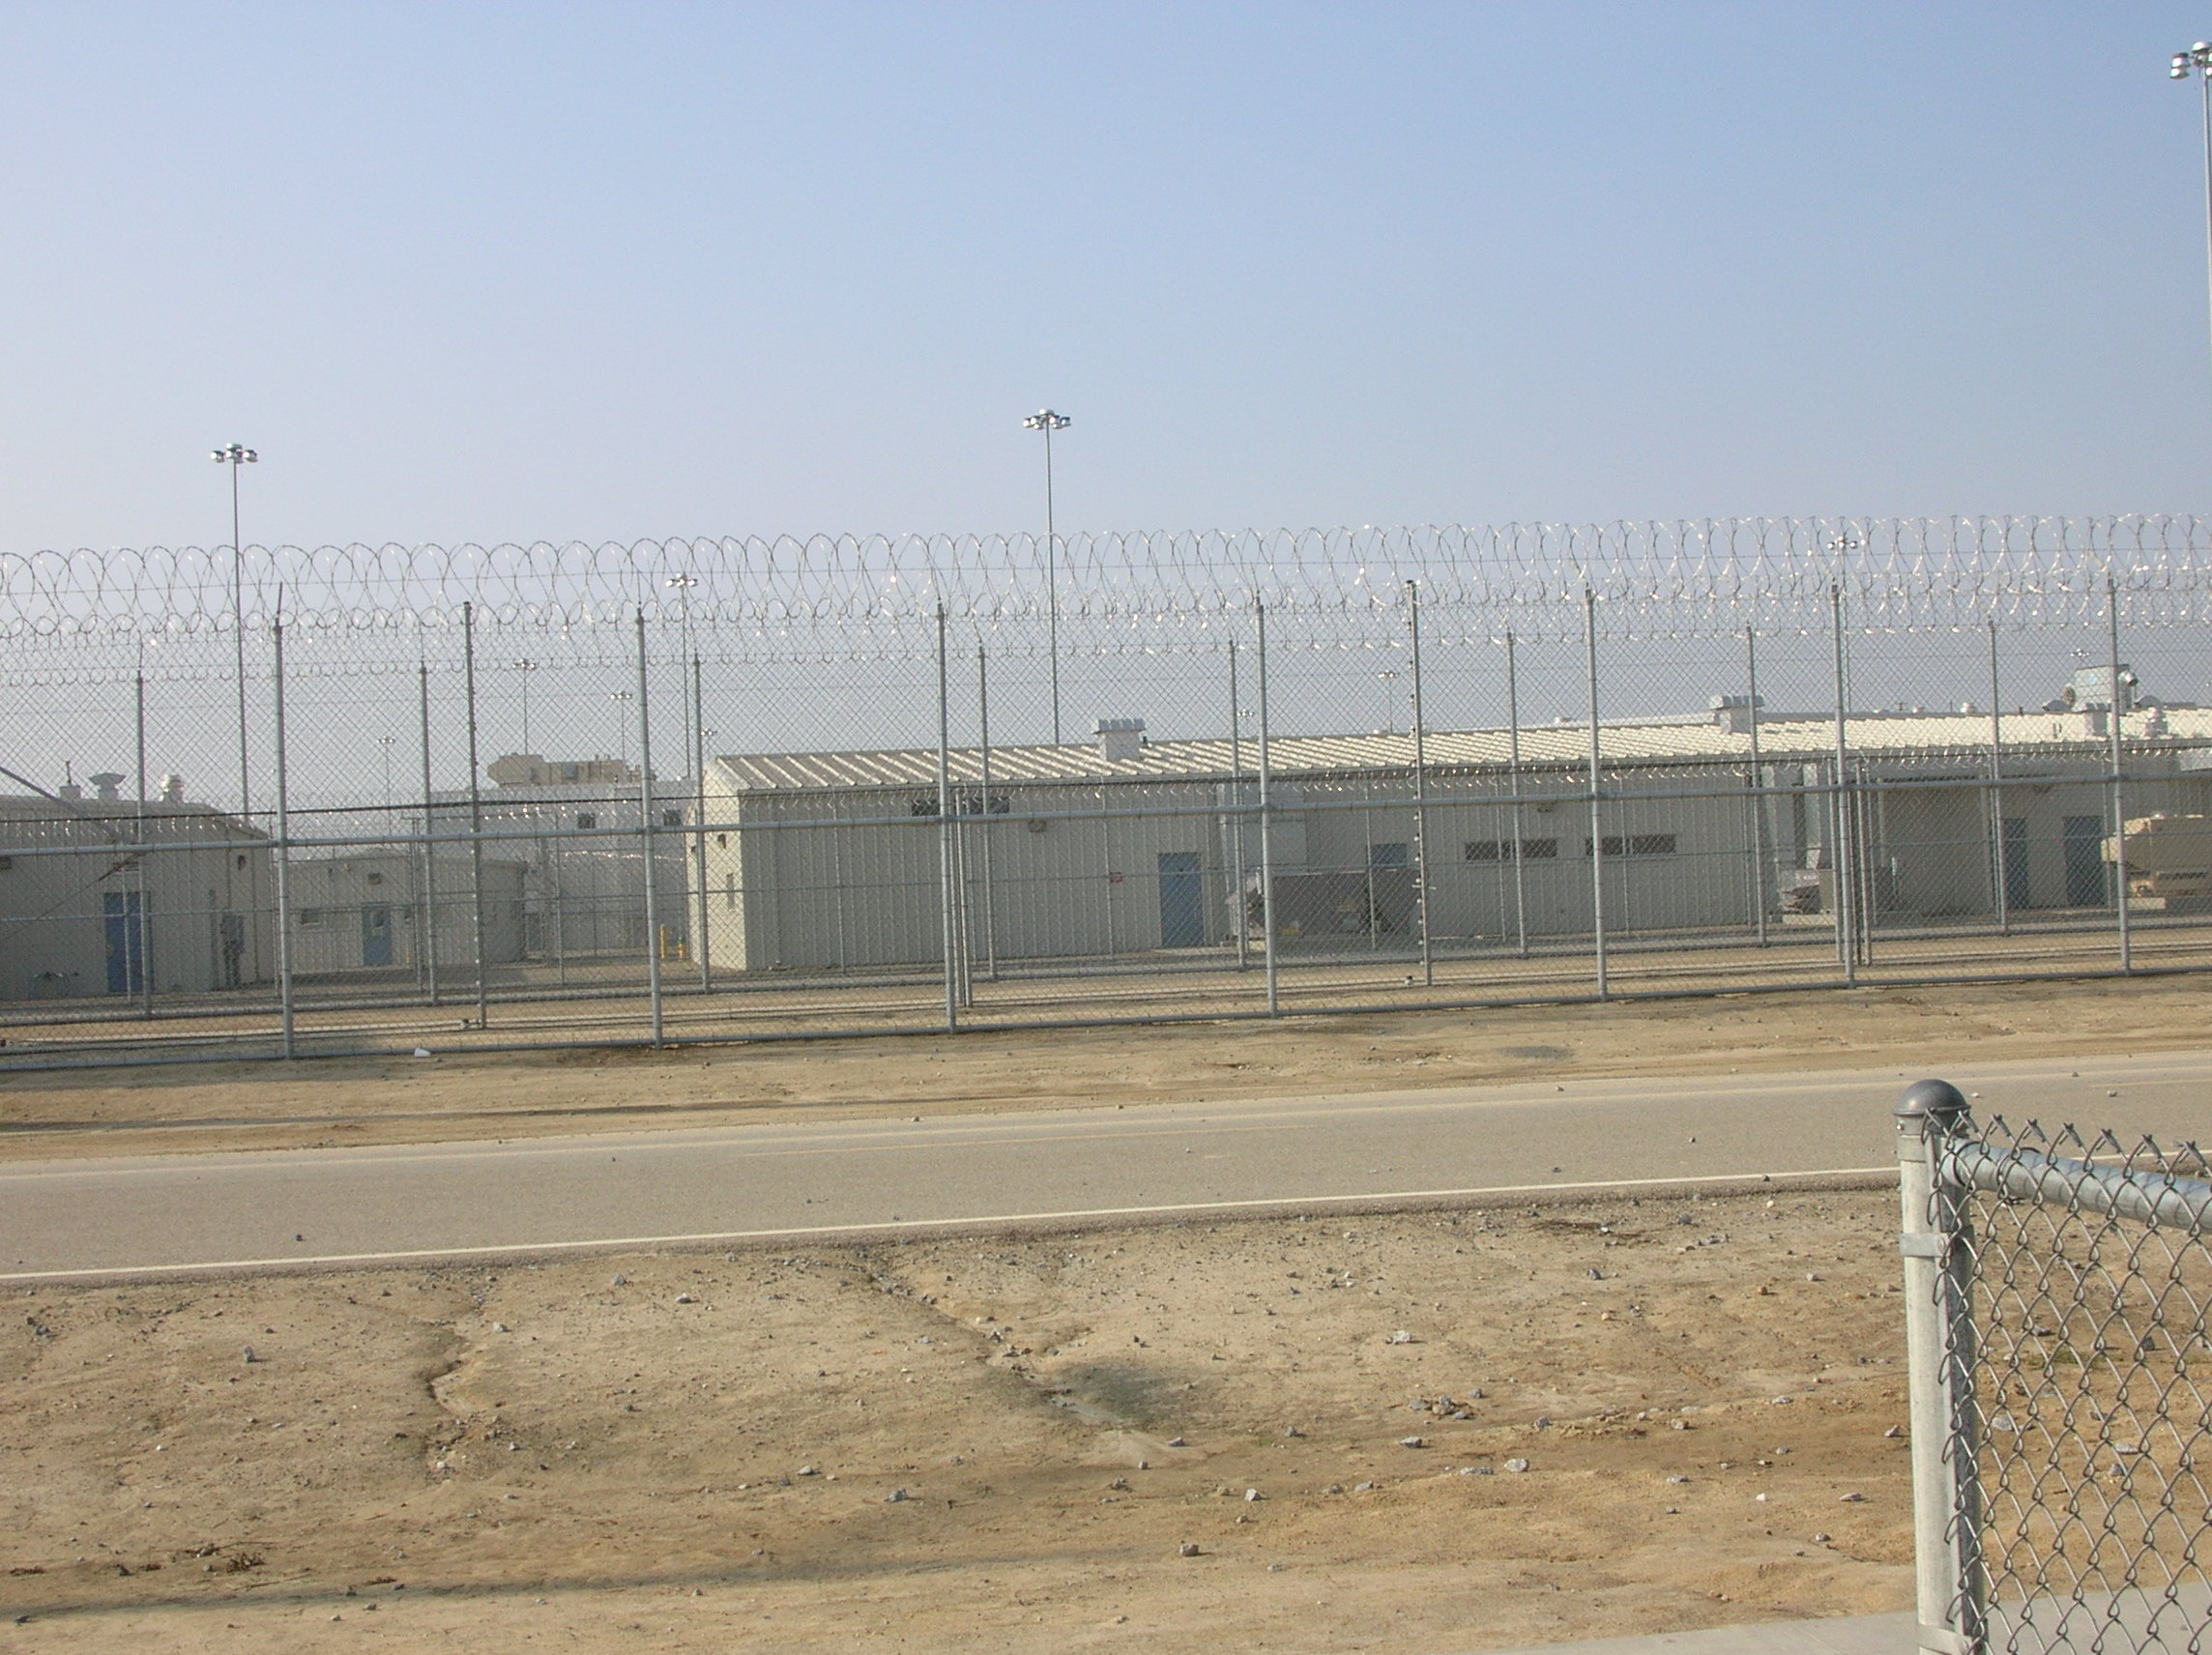 View of prison driving in from the road